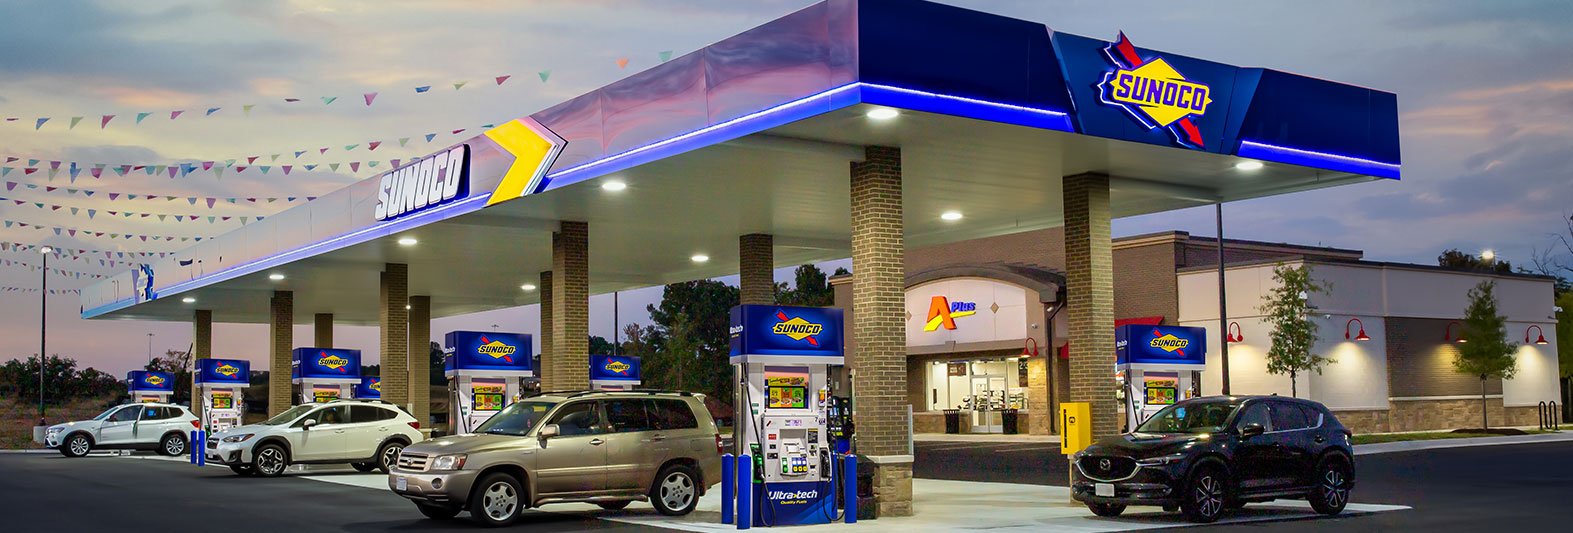 Aplus store with Sunoco branded fuel pumps at sunset